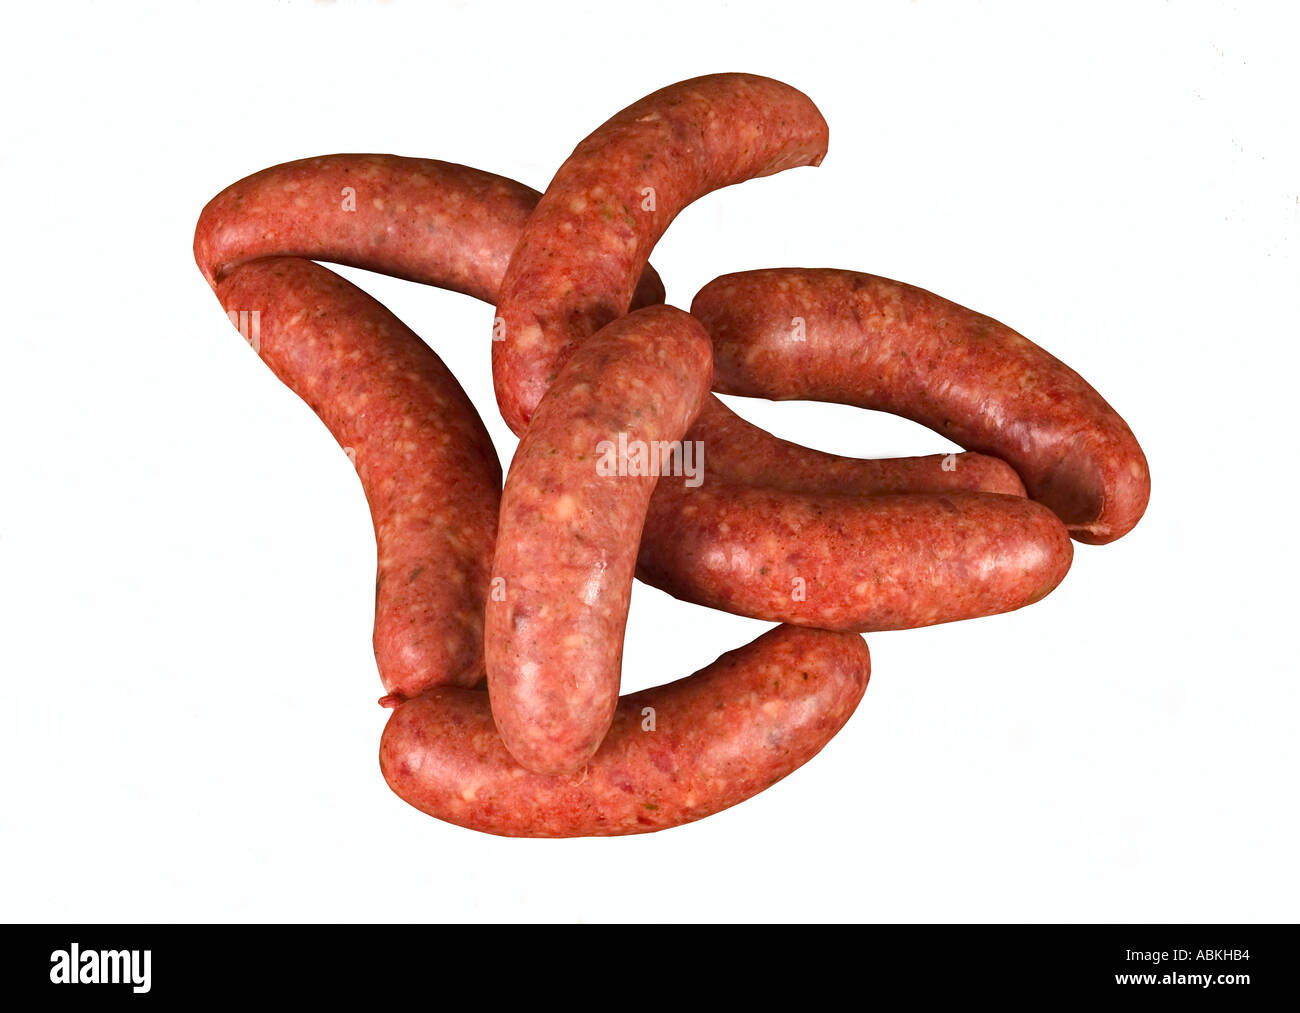 sausages raw pork traditional plate food meat eat cooking industry and bad for you banger bangers barbecue barbecues basics BBQ Stock Photo